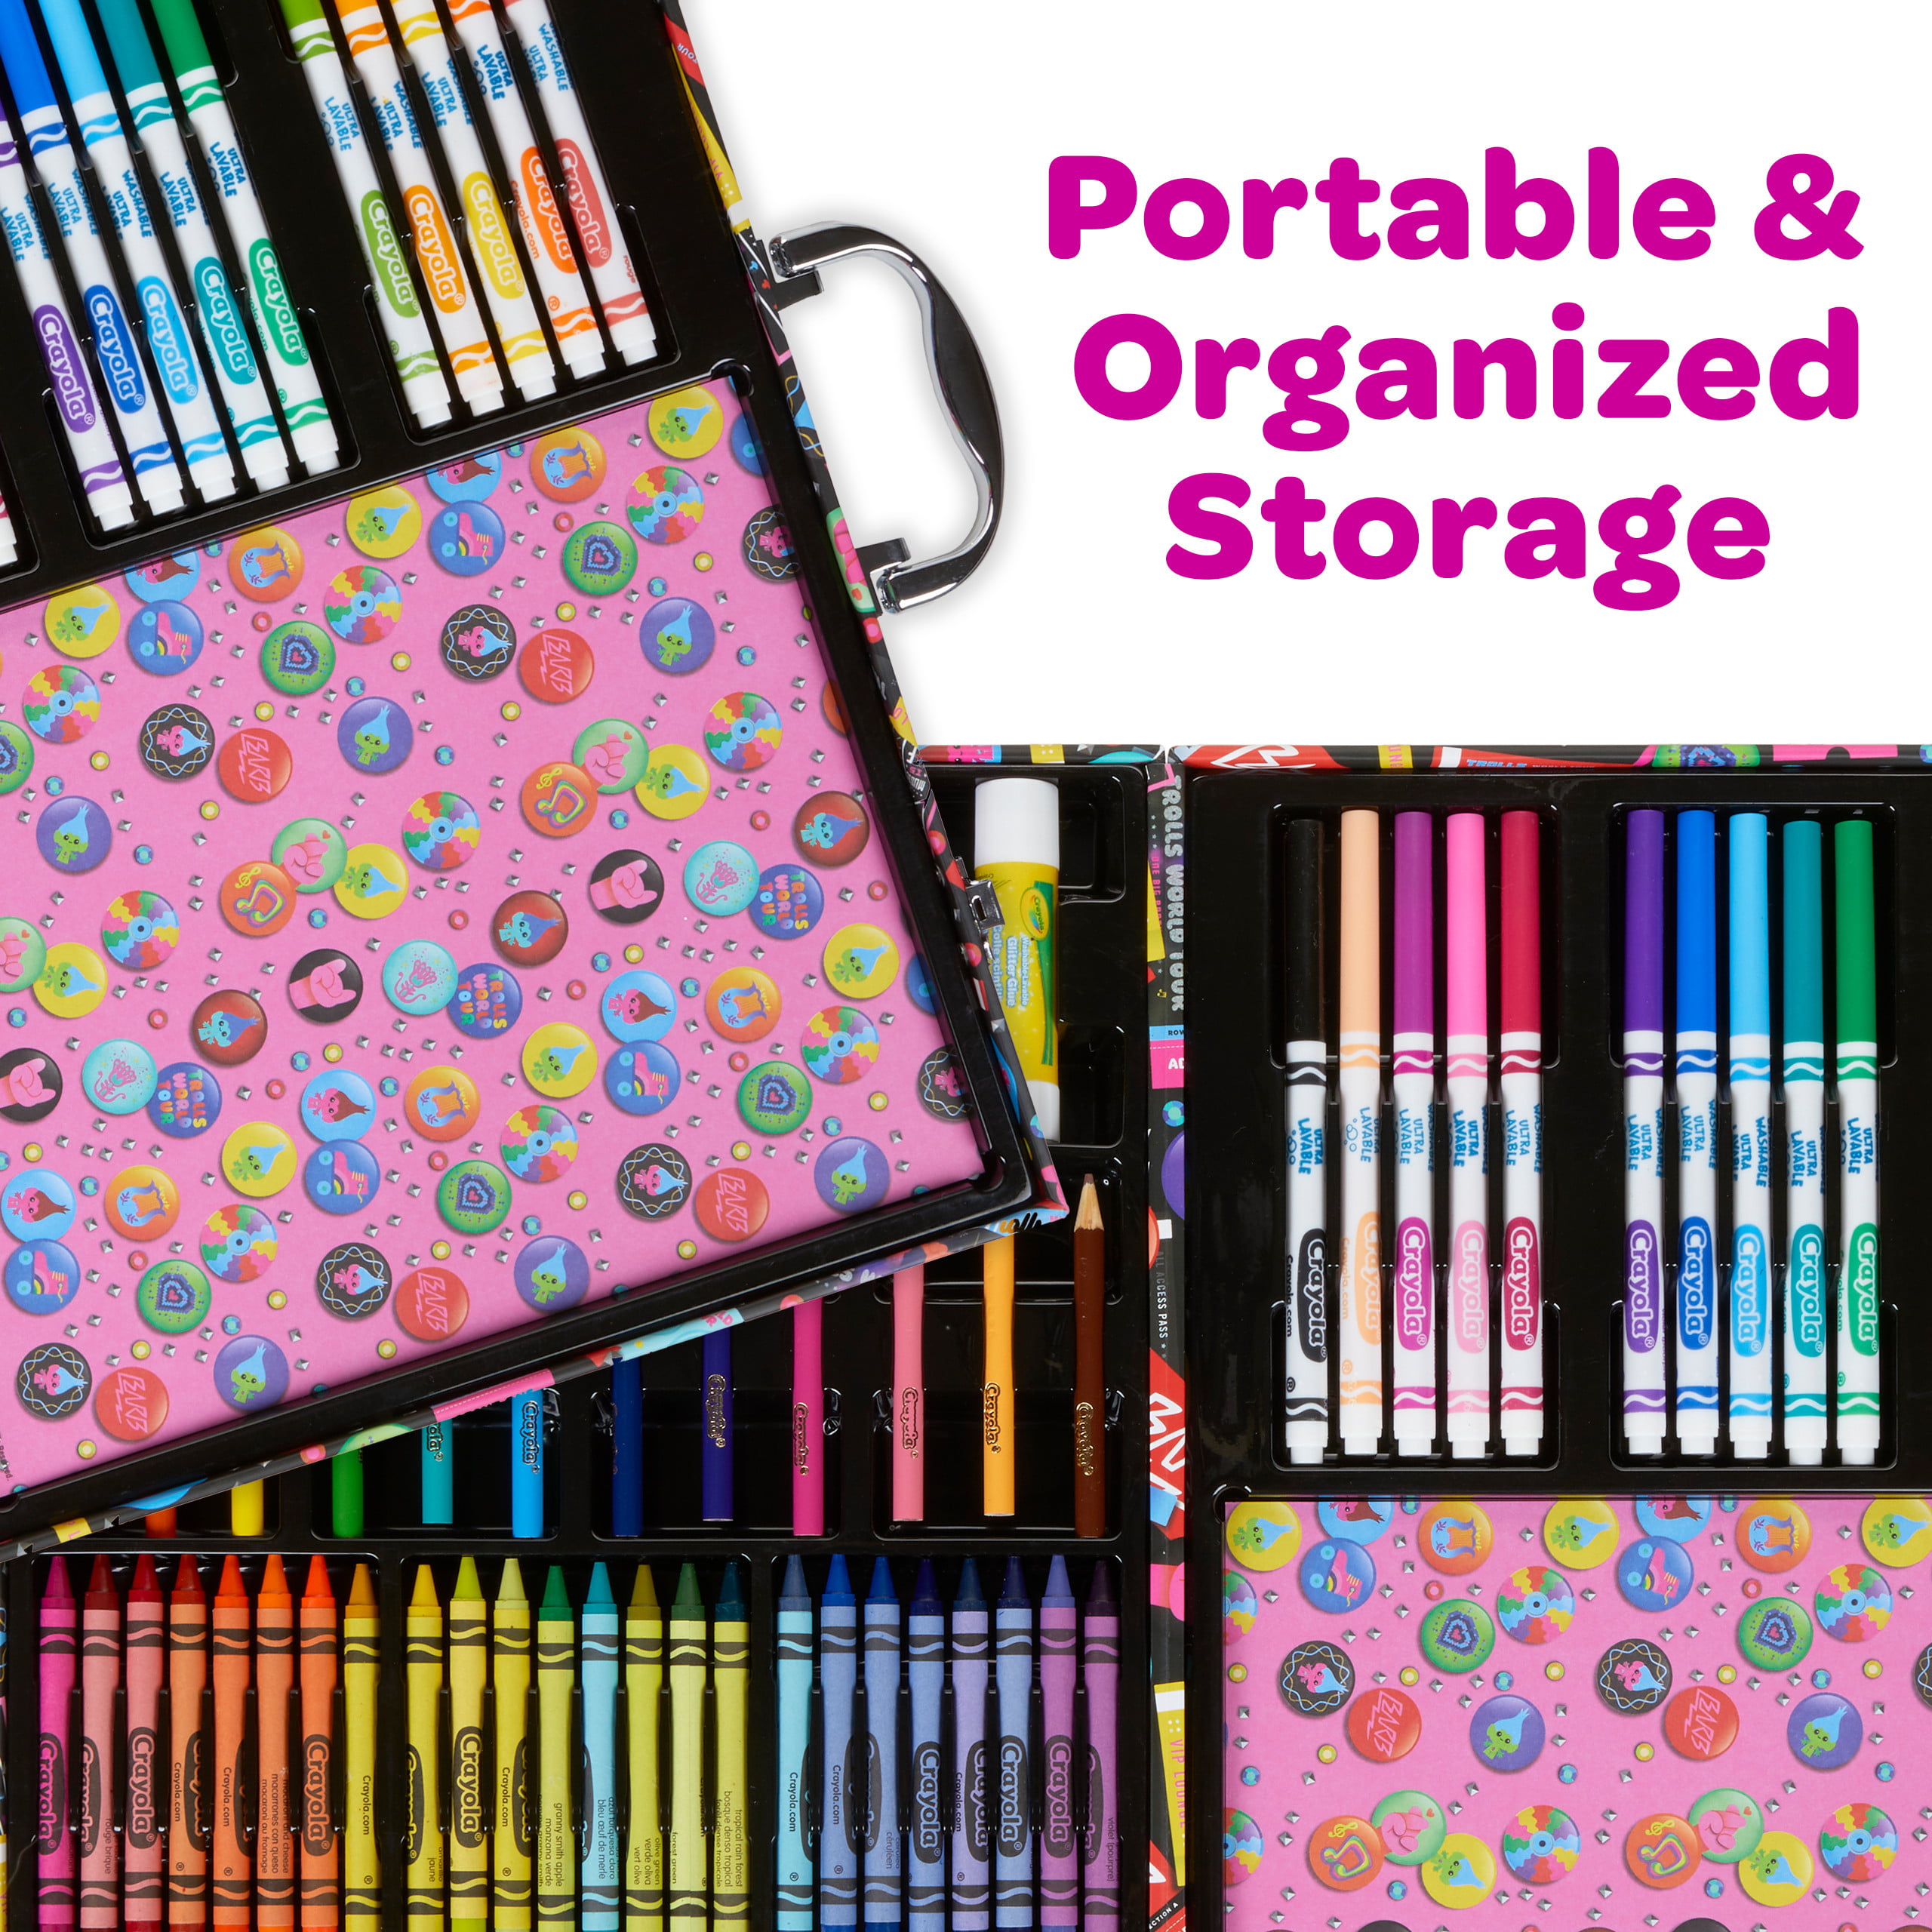 Crayola Inspiration Art Case in Pink, Coloring Supplies, Gifts for